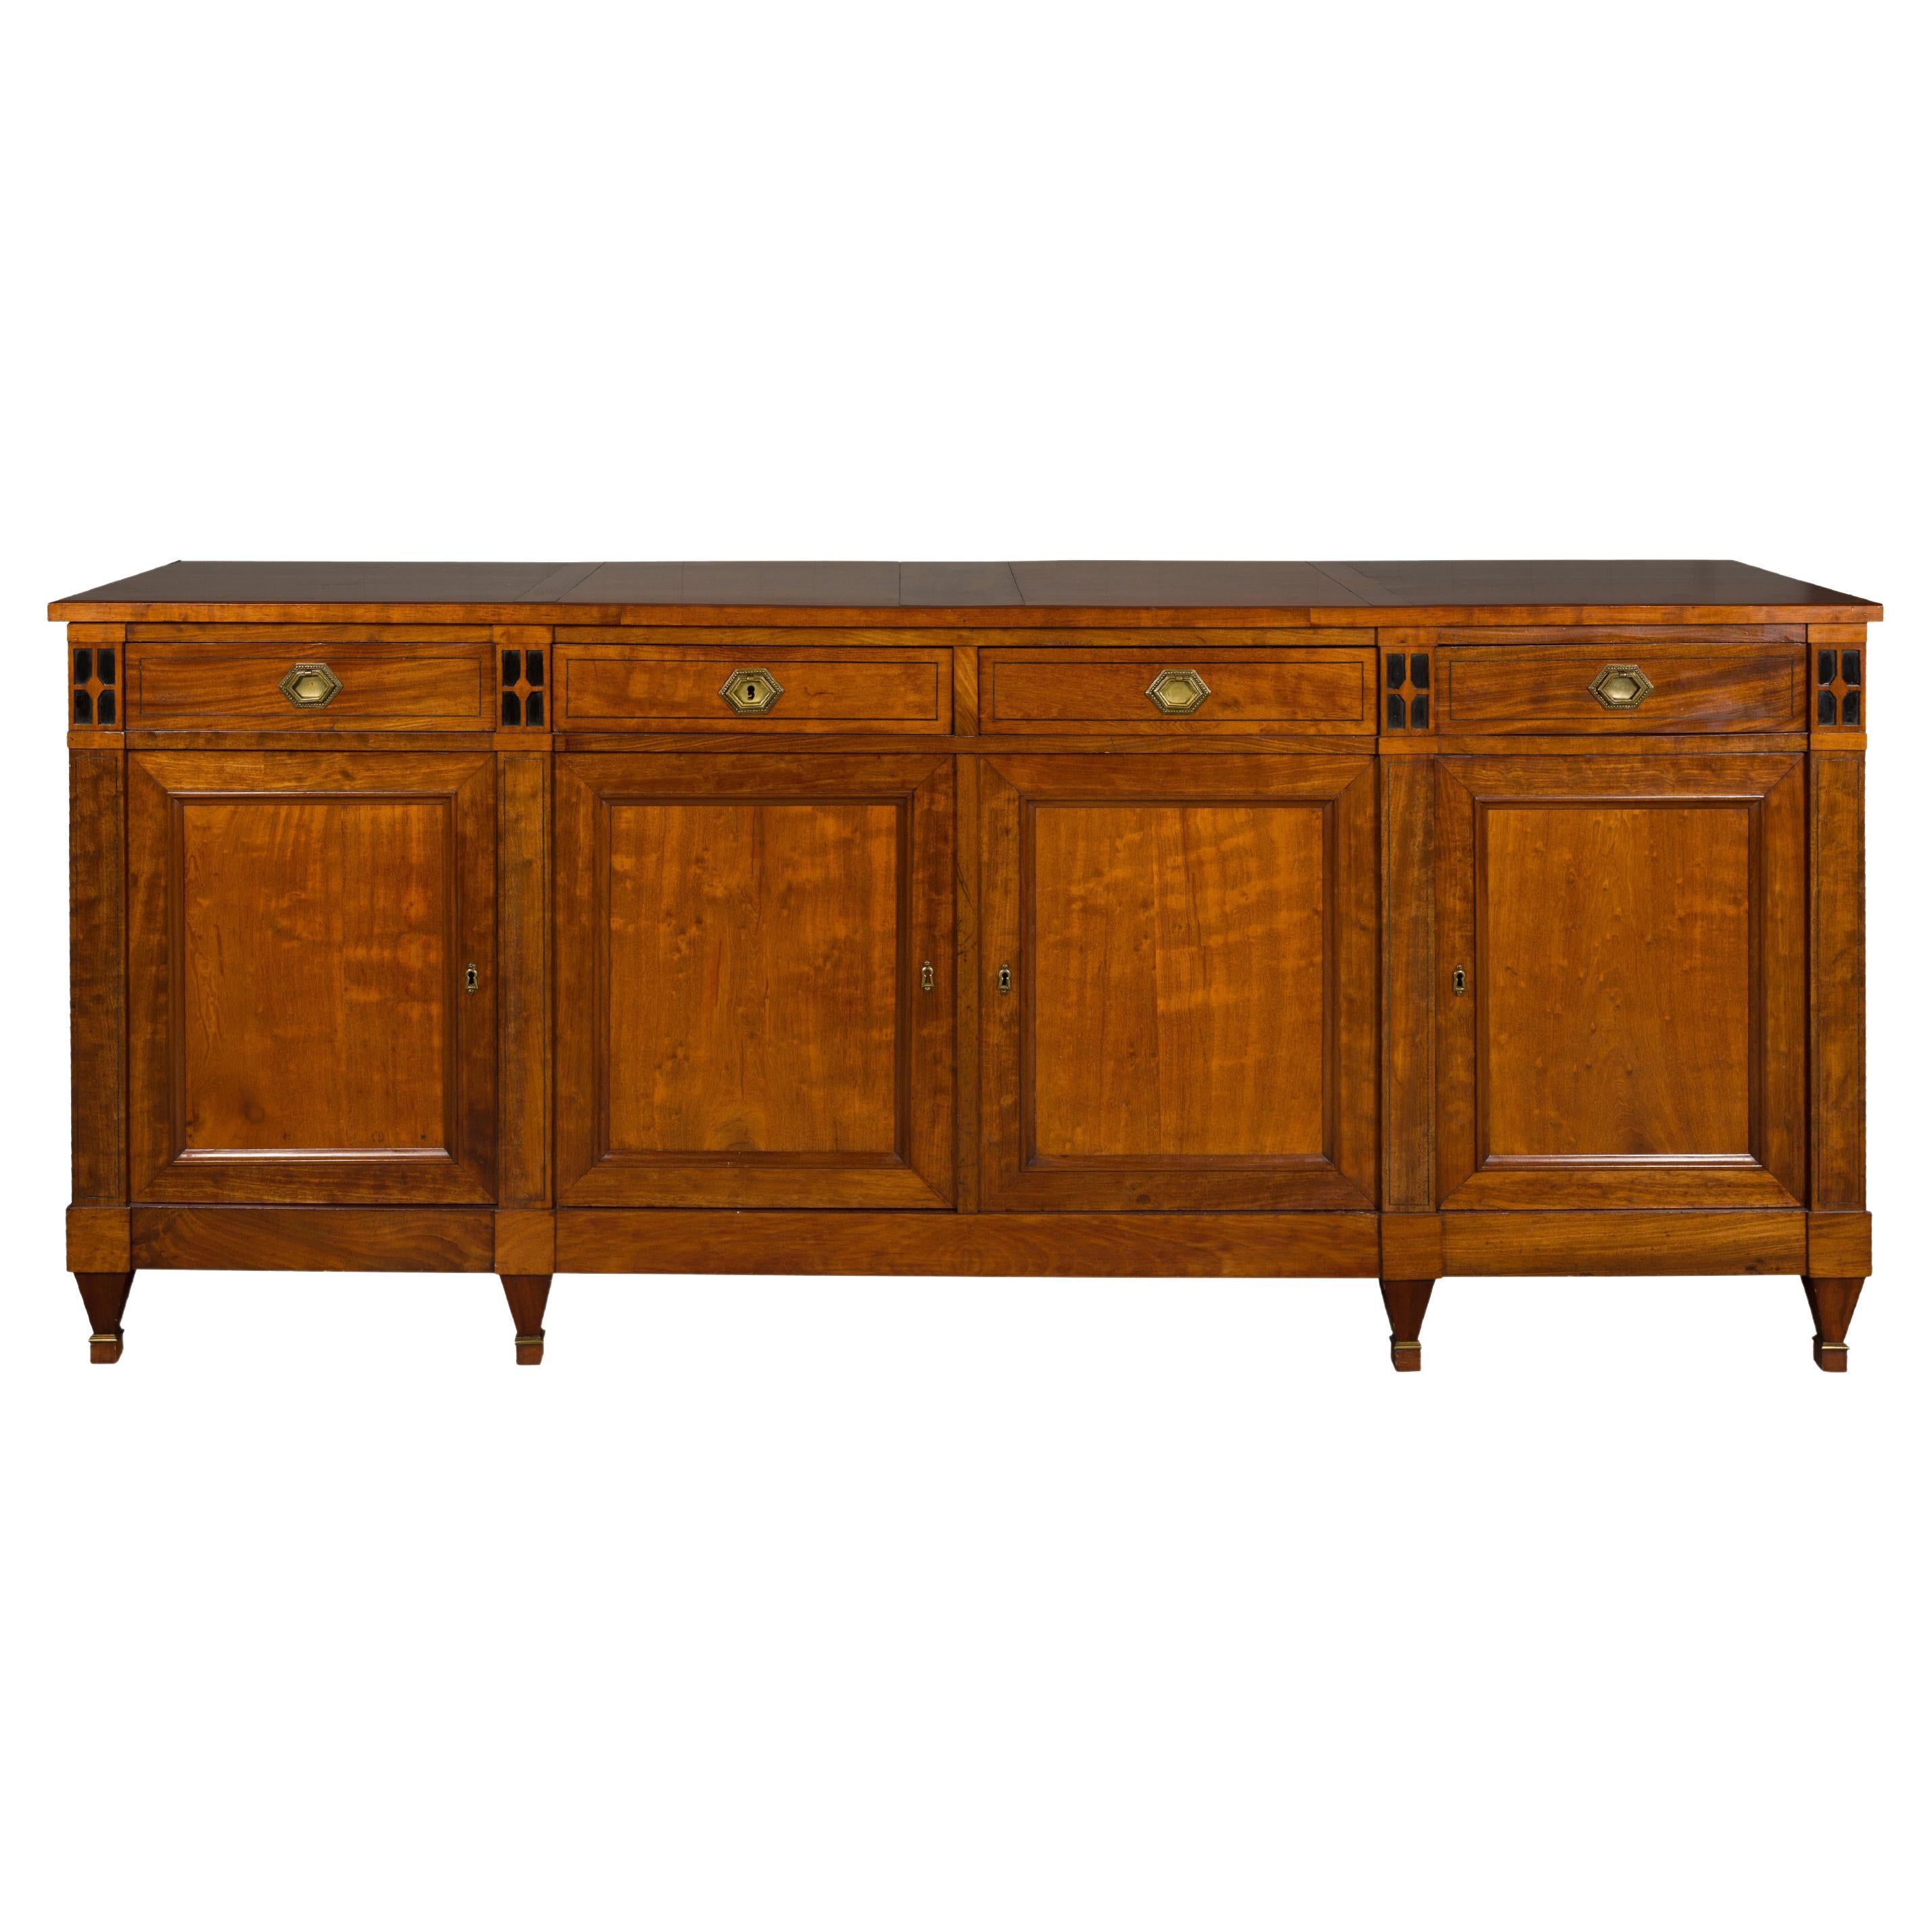 French Turn of the Century Walnut Enfilade with Four Drawers over Four Doors